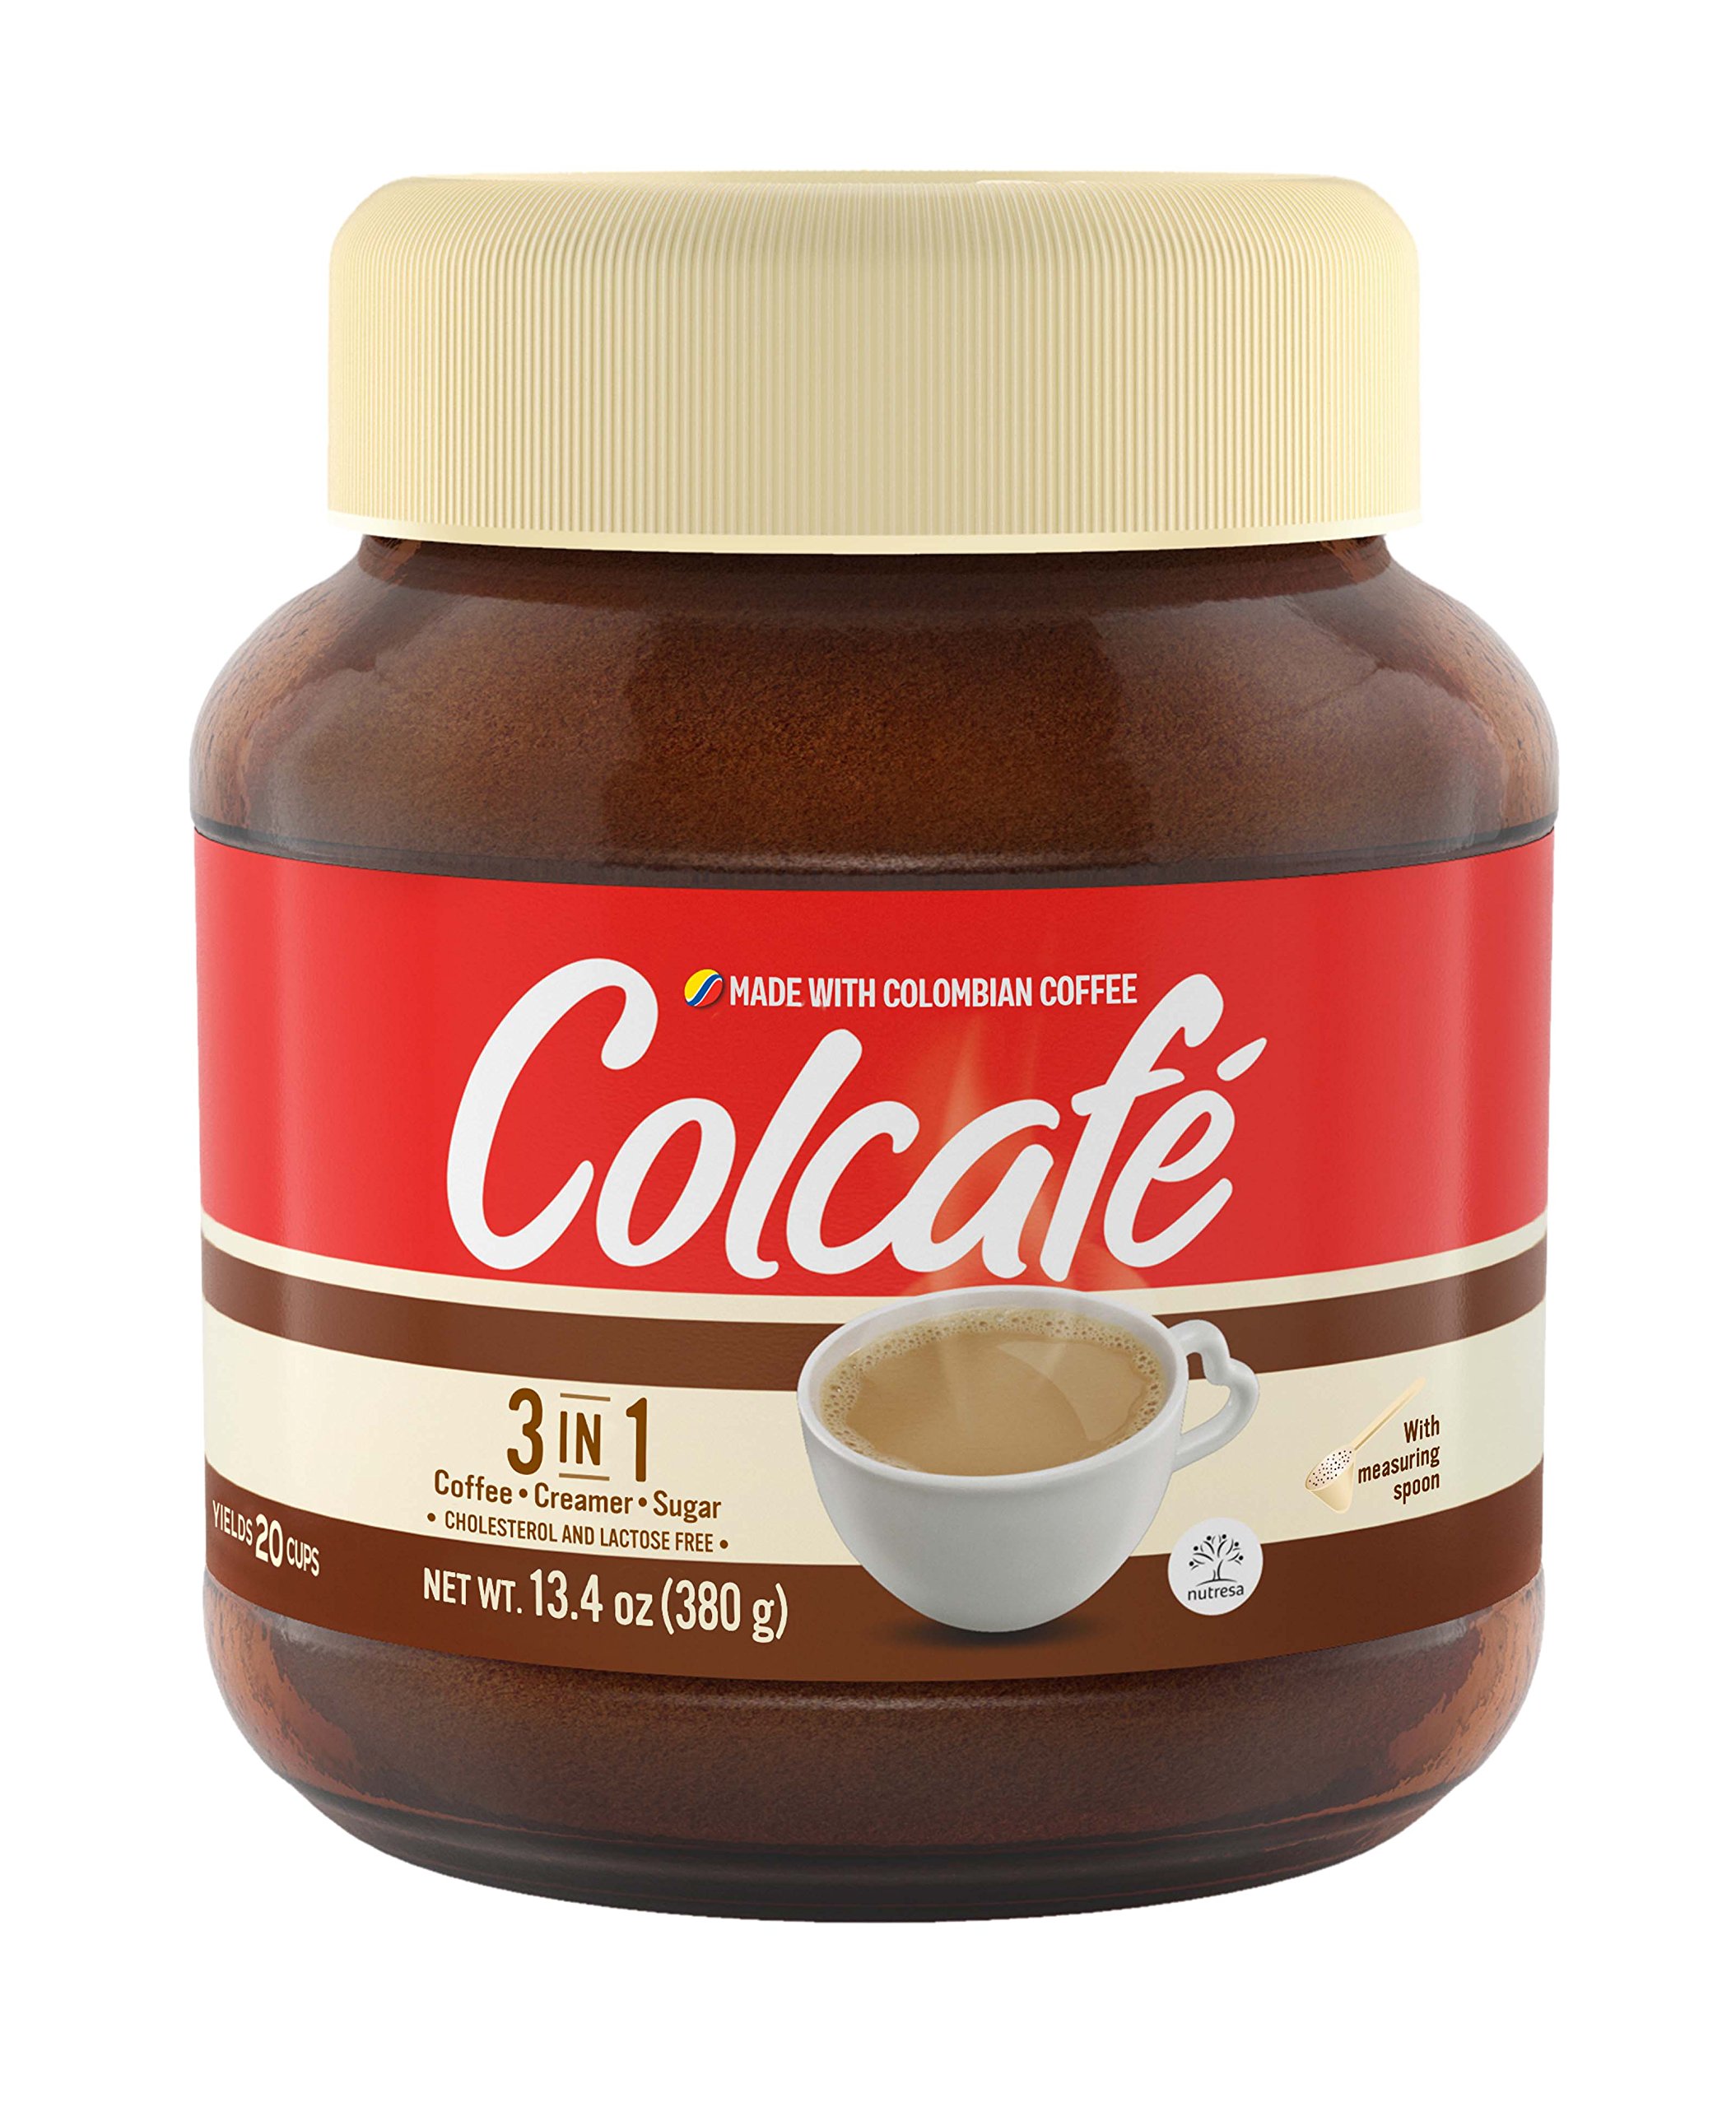 Colcafé 3-in-1 Coffee Mix Jar | Coffee, Cream & Sugar in a Delicious Cup | Cholesterol Free | 100% Colombian Coffee | 13.4 Ounce (Pack of 1)